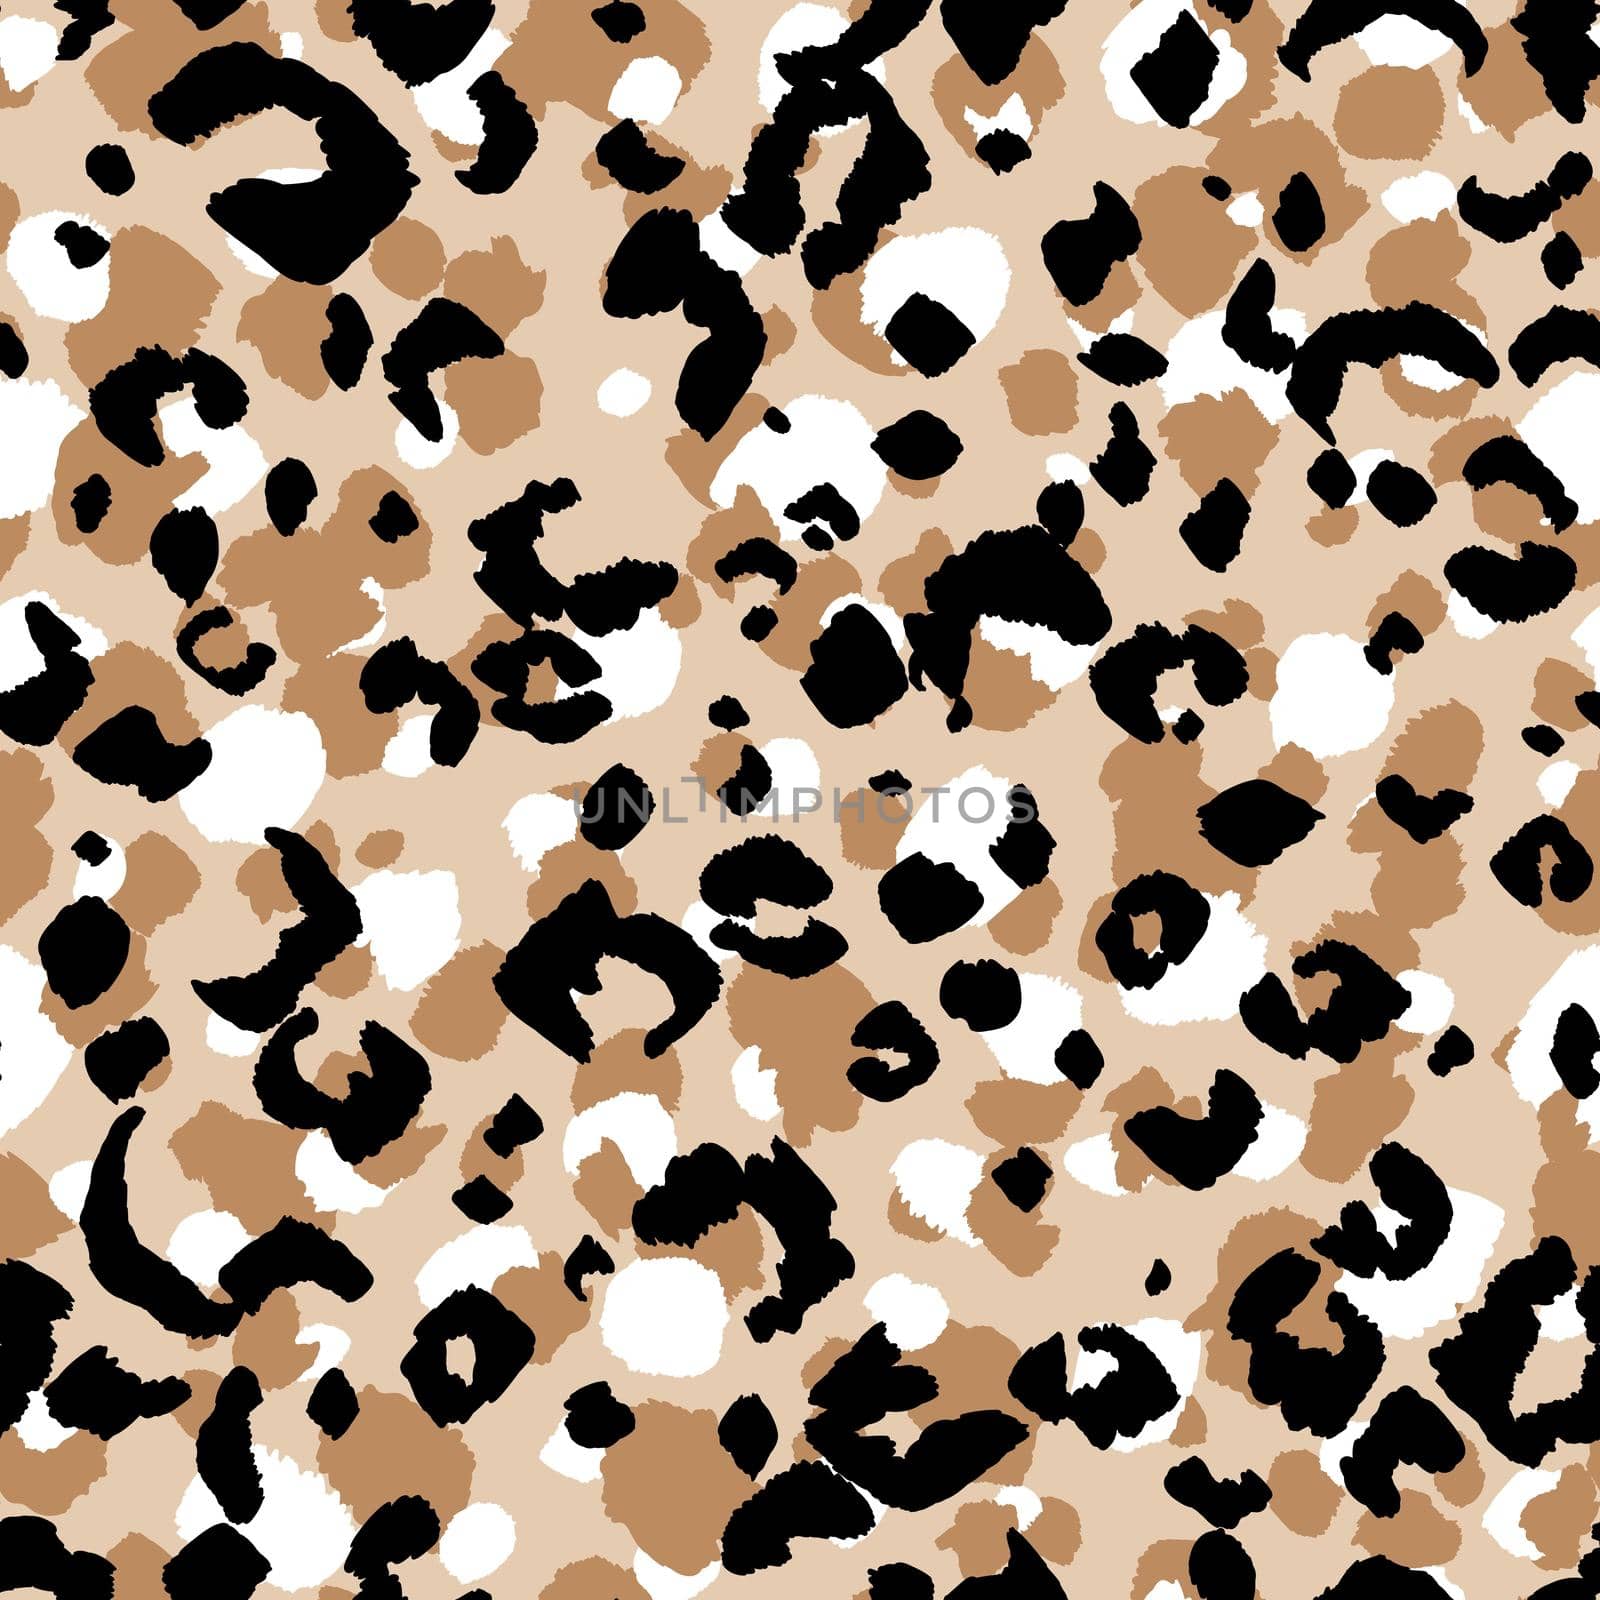 Abstract modern leopard seamless pattern. Animals trendy background. Beige and black decorative vector stock illustration for print, card, postcard, fabric, textile. Modern ornament of stylized skin. by allaku